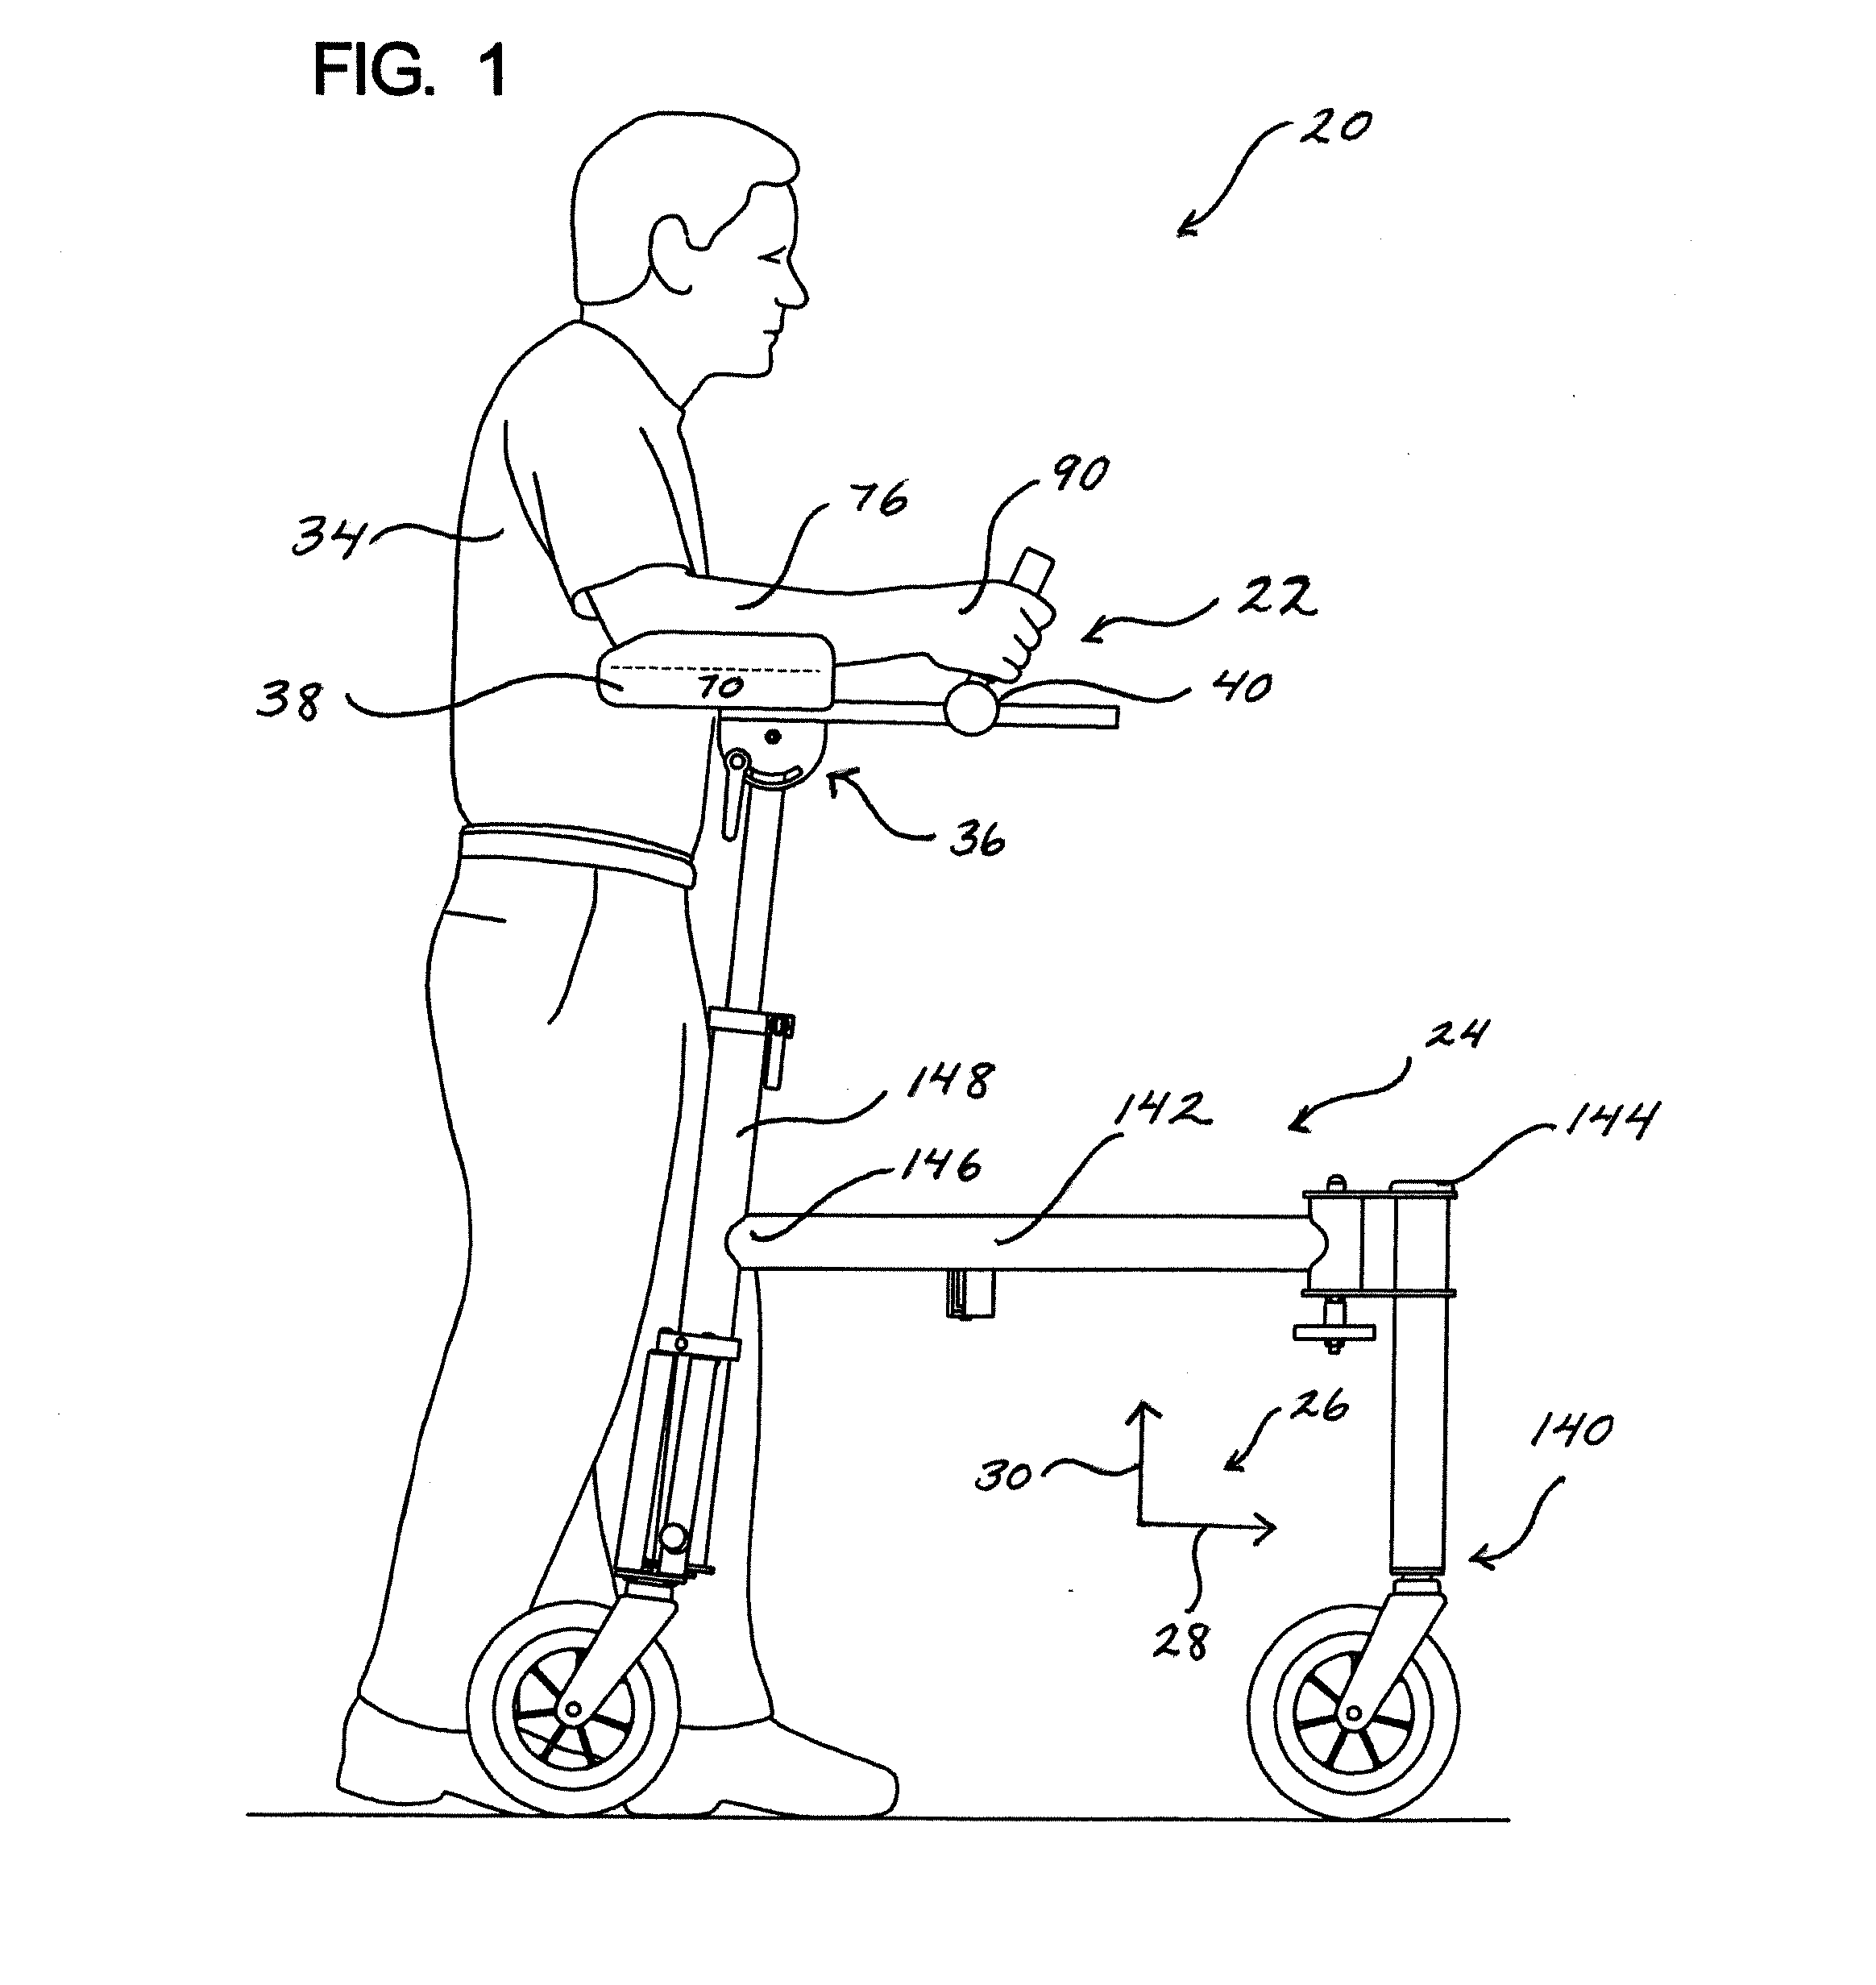 Bipedal motion assisting method and apparatus